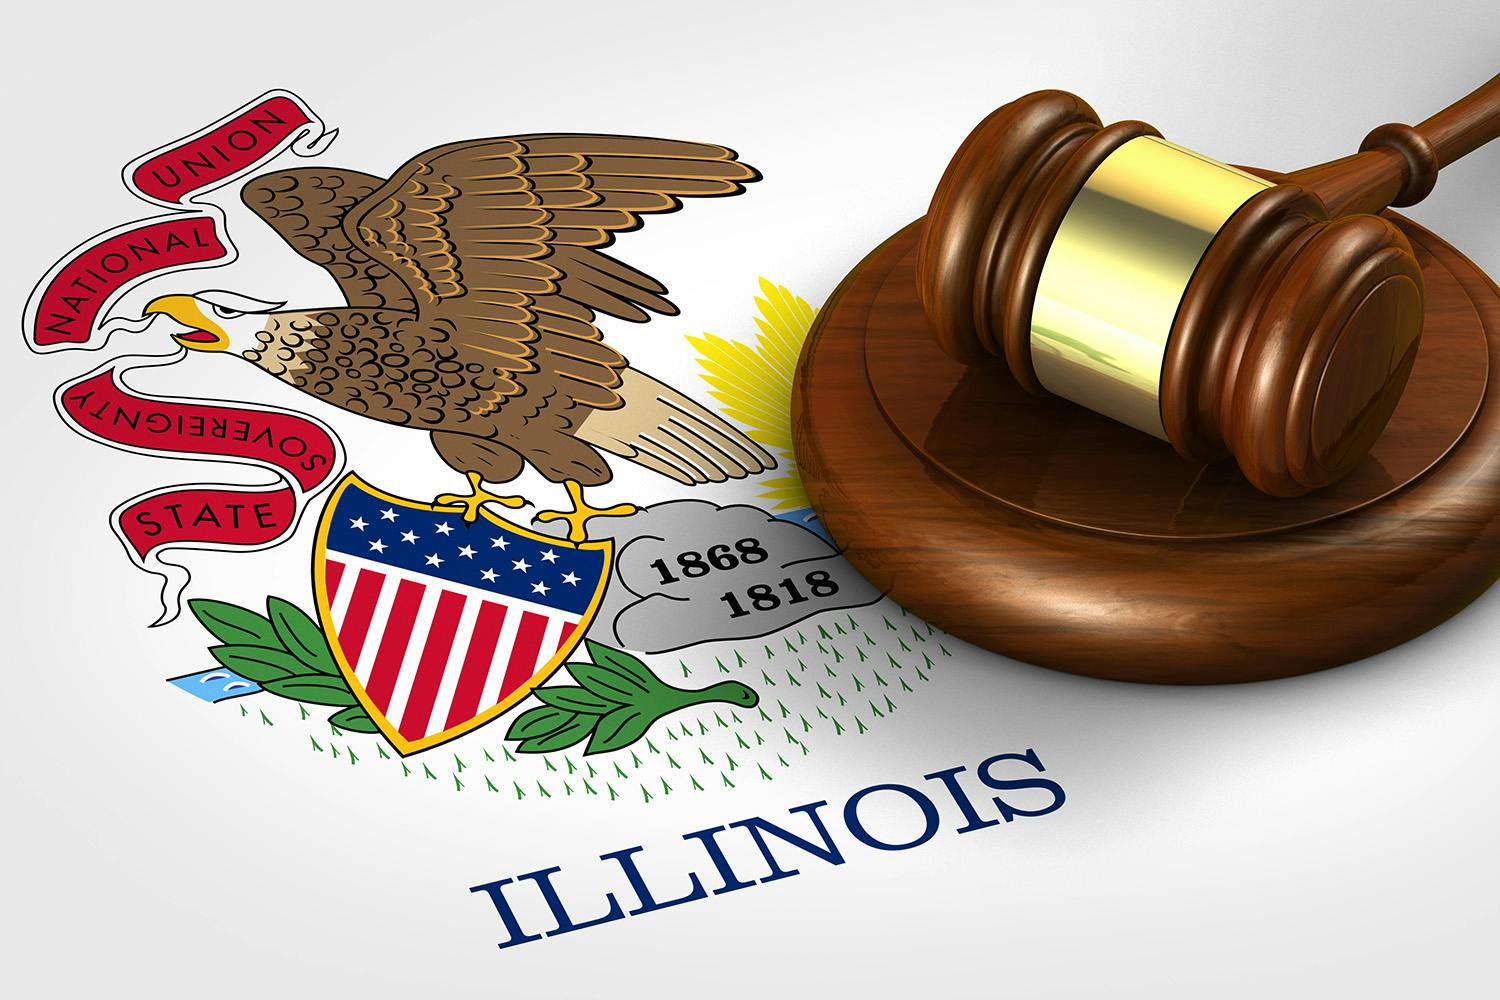 Illinois state flag and legal gavel seperate from federal law